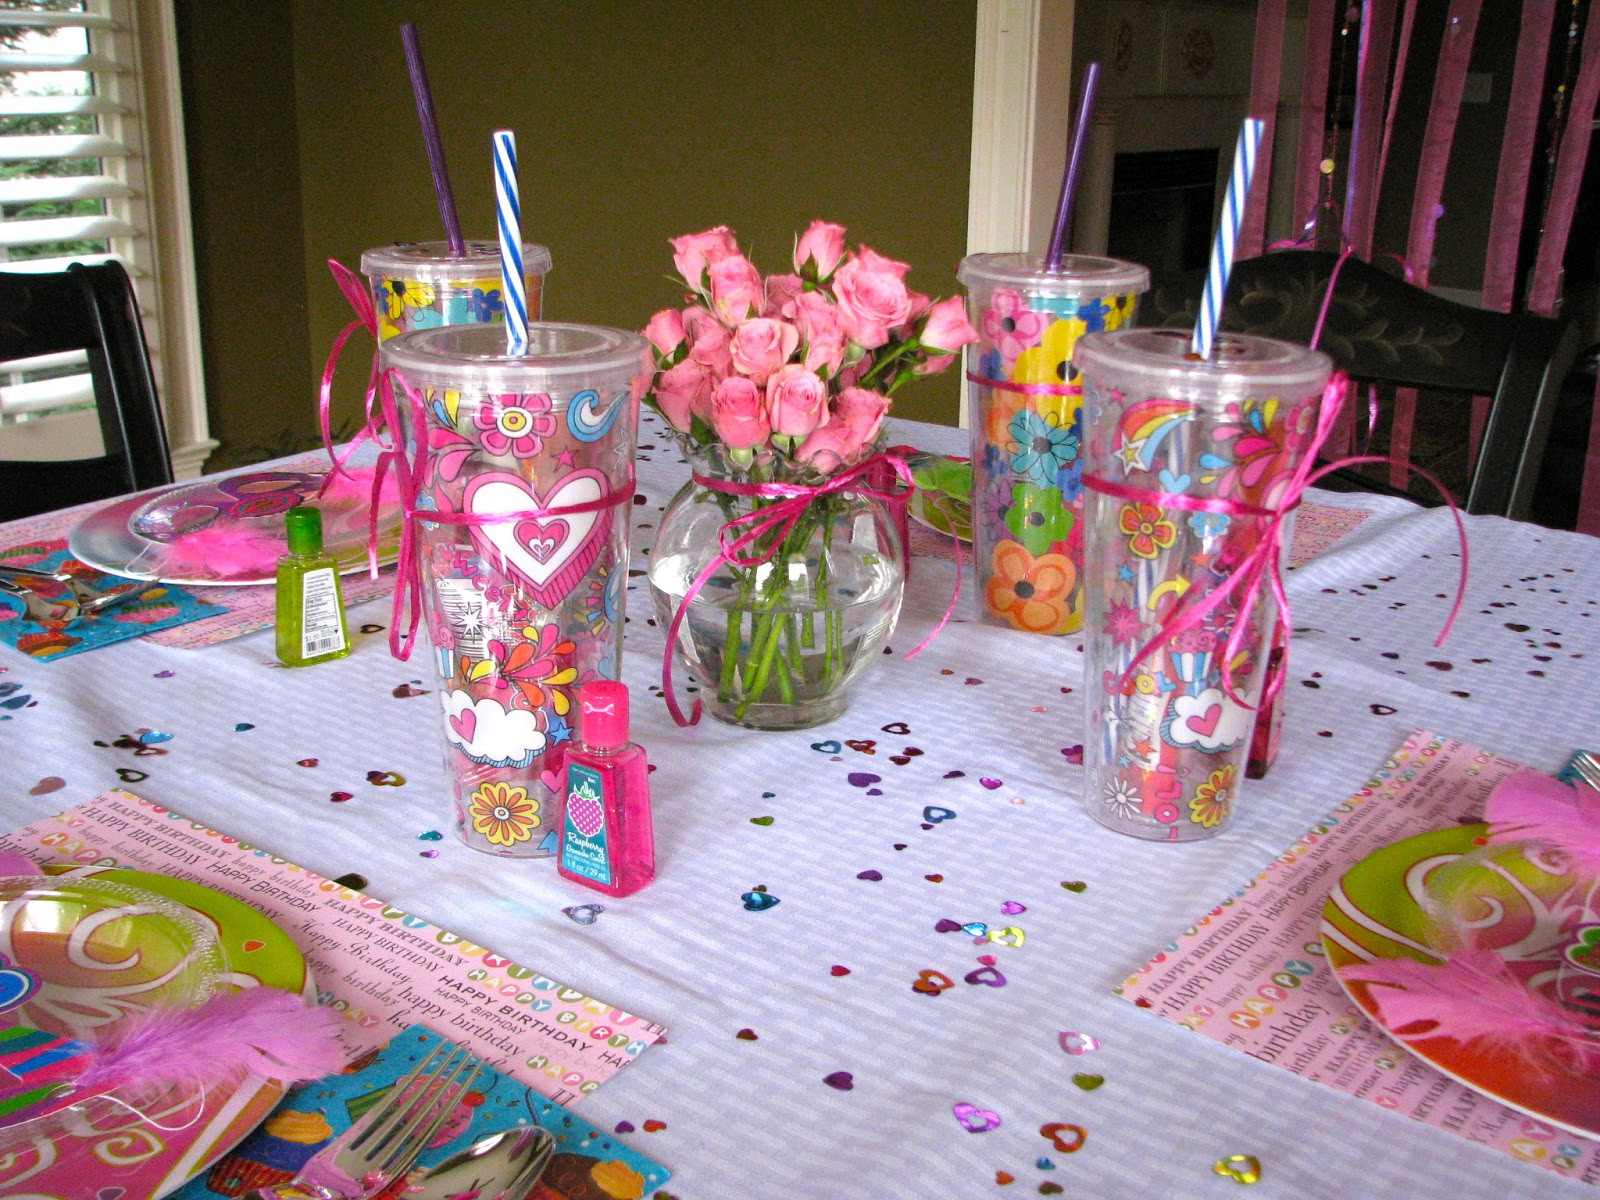 Girl Birthday Party Supplies
 HomeMadeville Your Place for HomeMade Inspiration Girl s